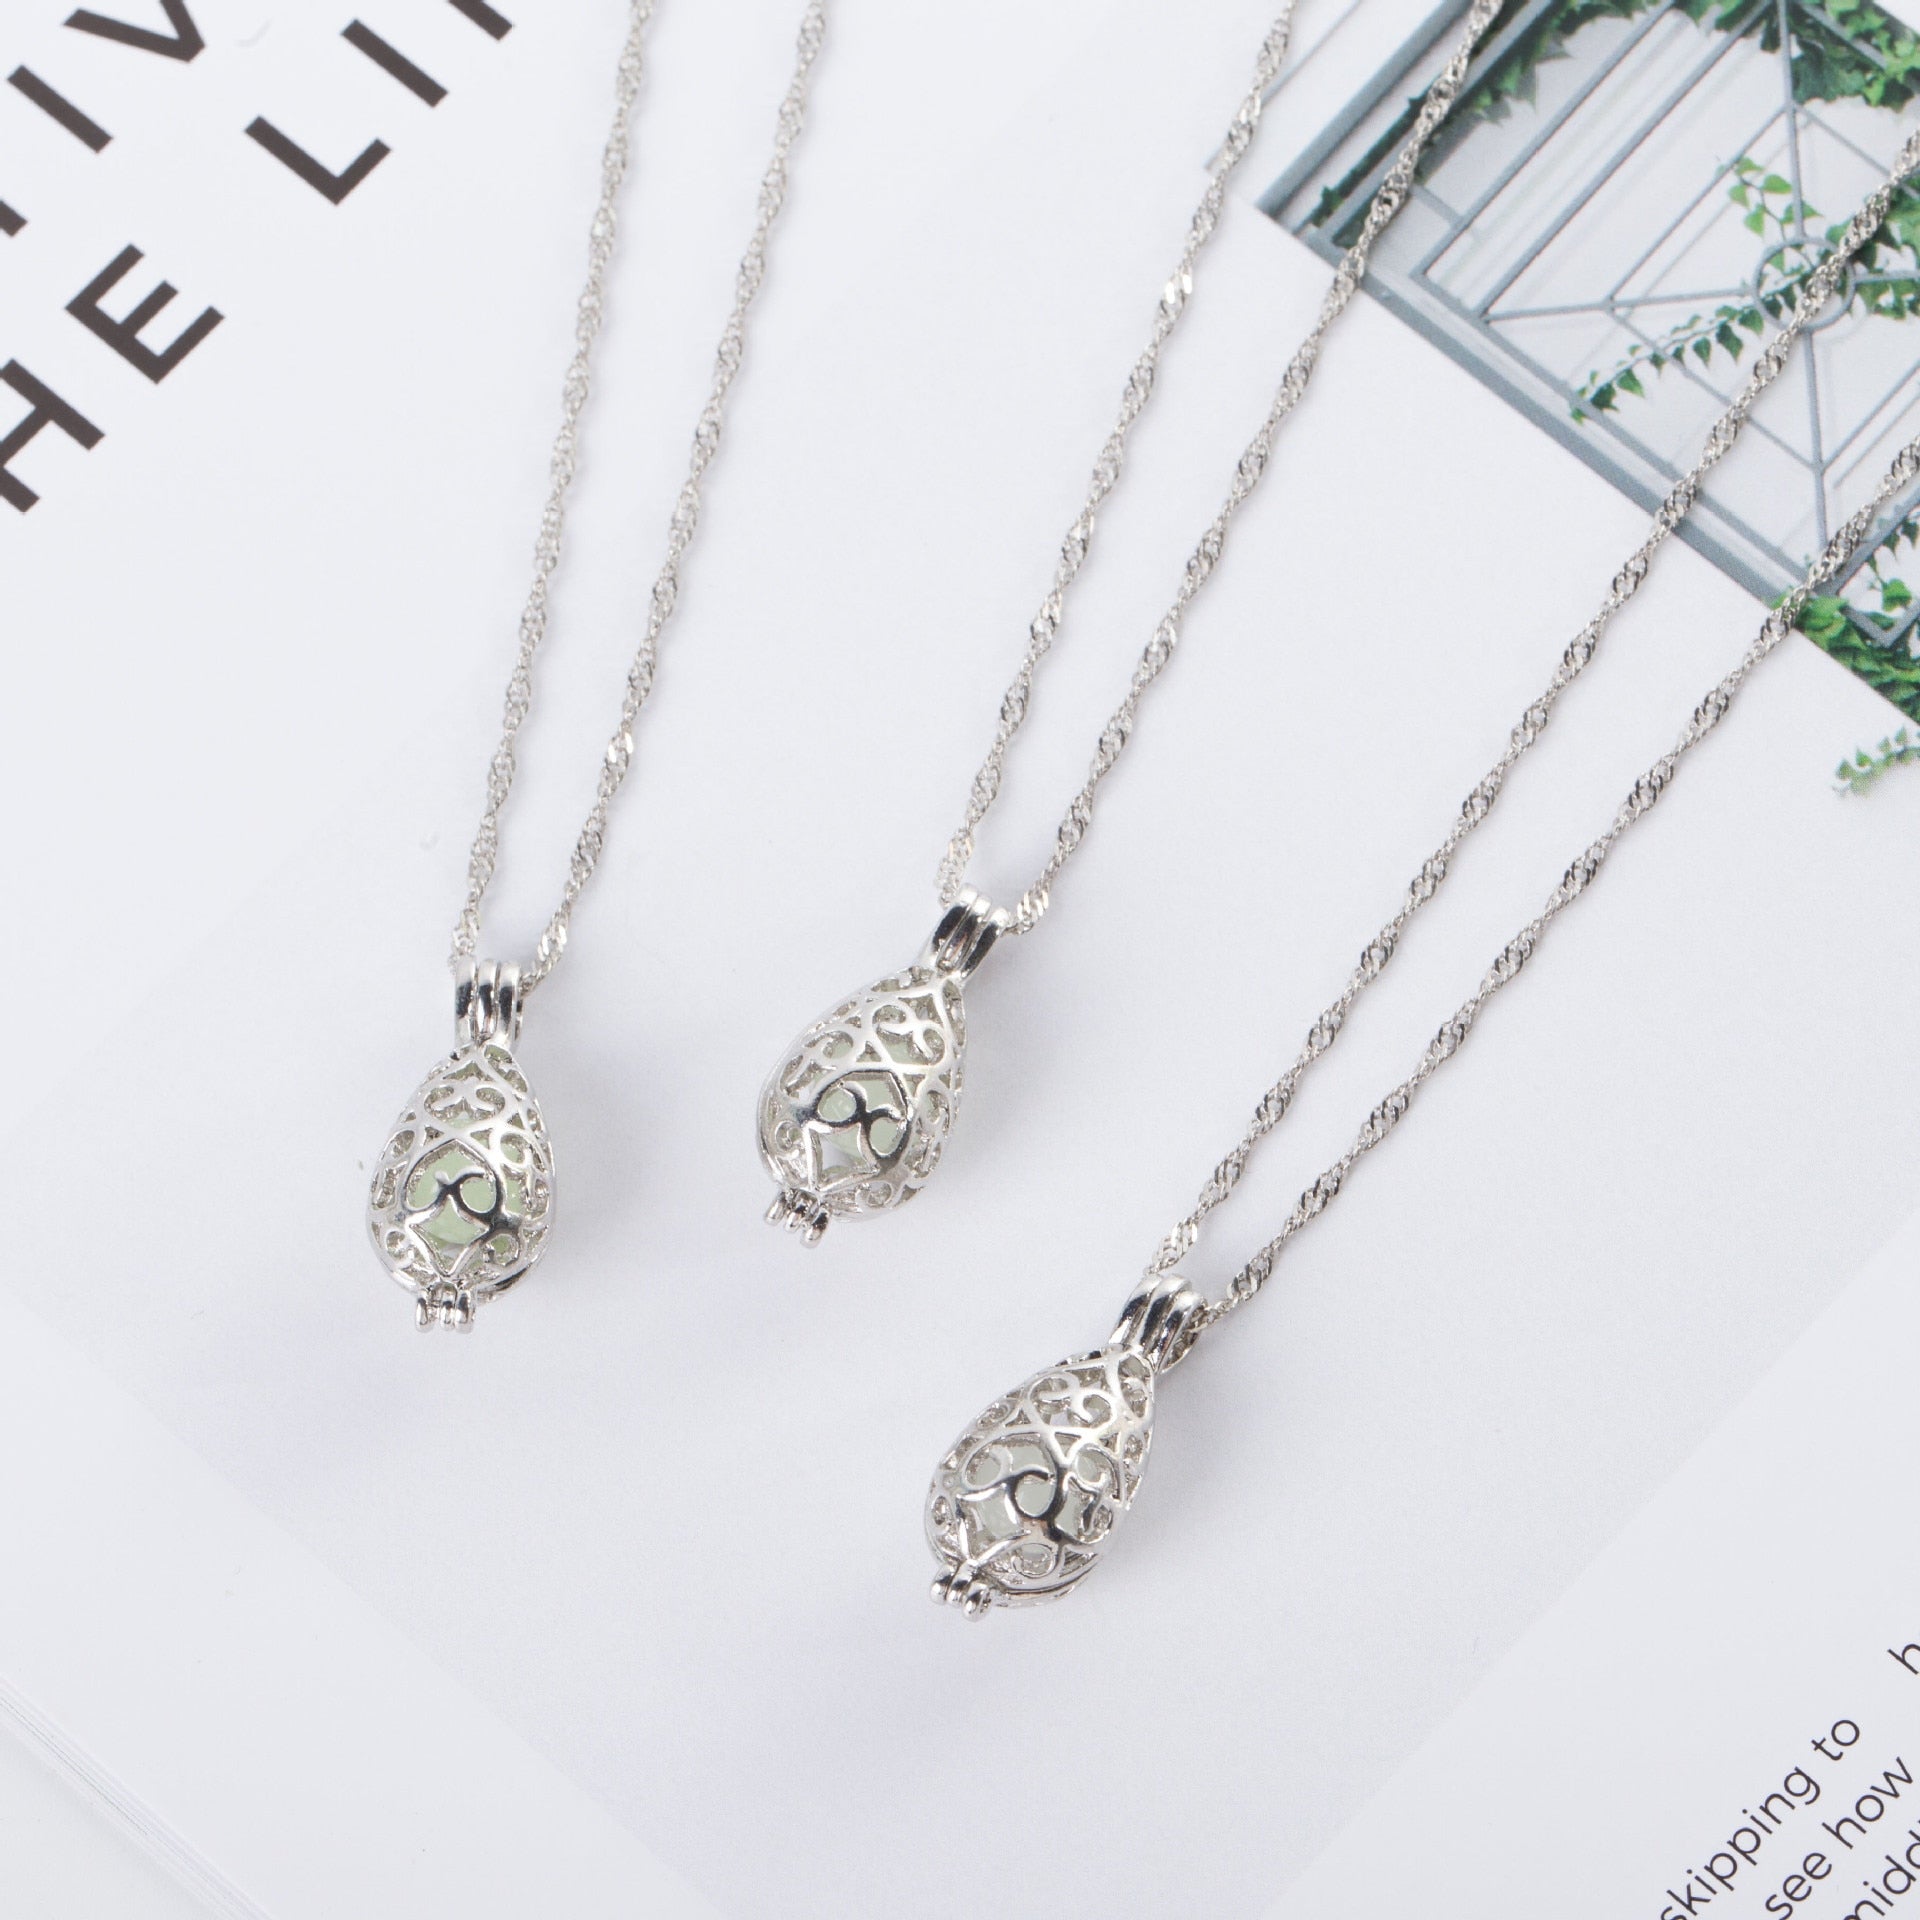 Special creative water drop luminous necklace can open hollow luminous necklace, women's simple small cage clavicle chain